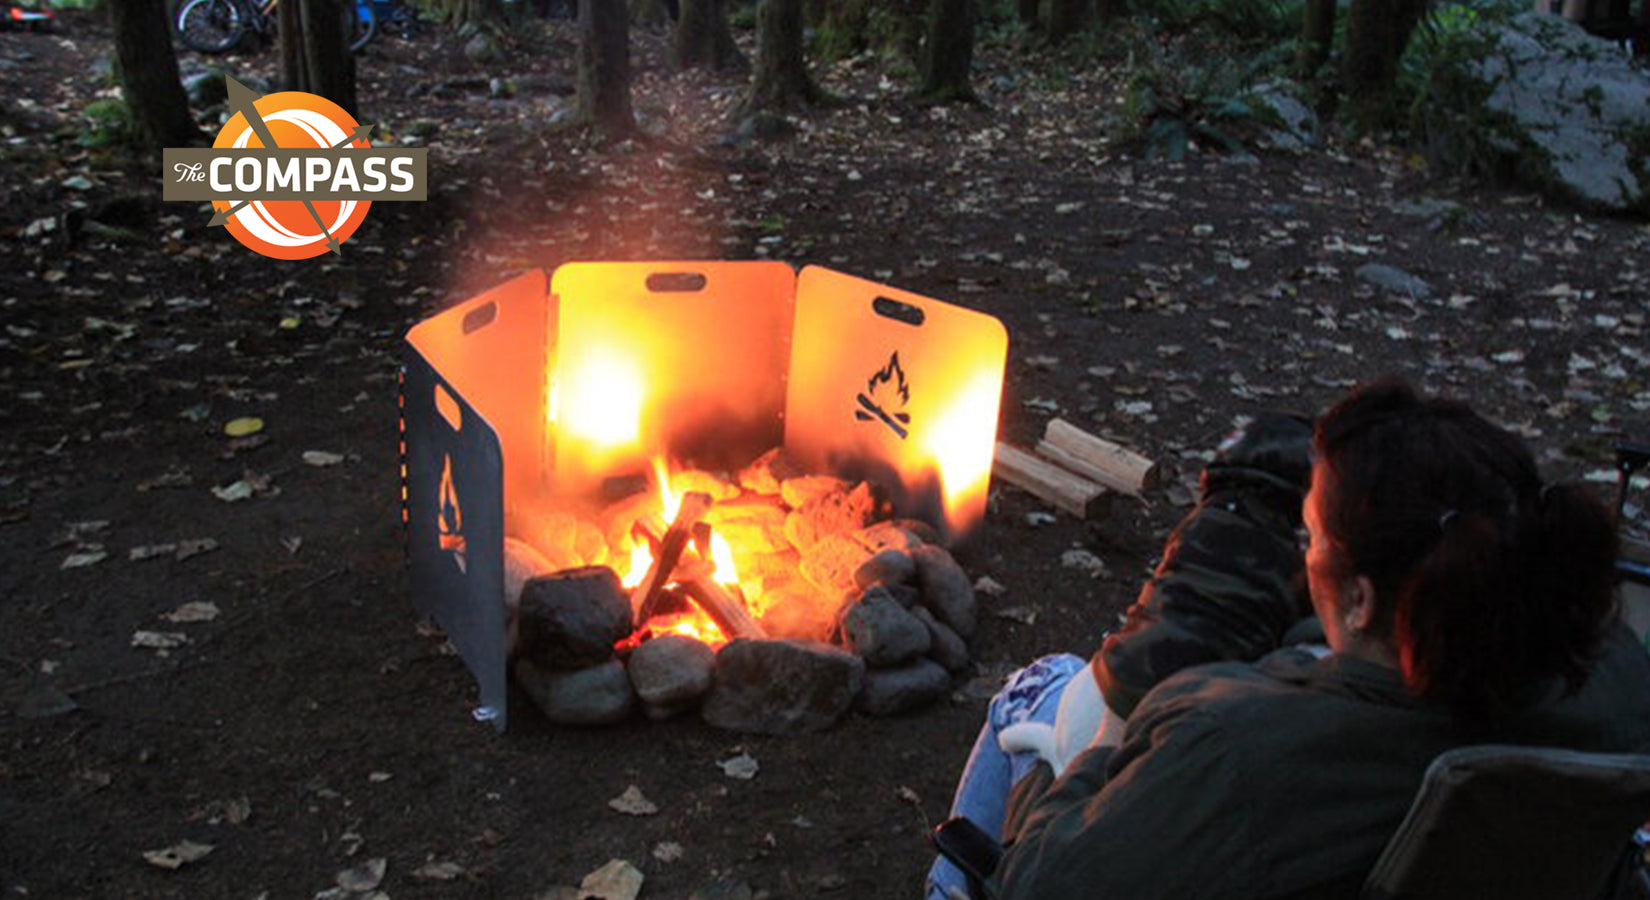 One Man's Quest for Fire - @OVERLAND EXPO